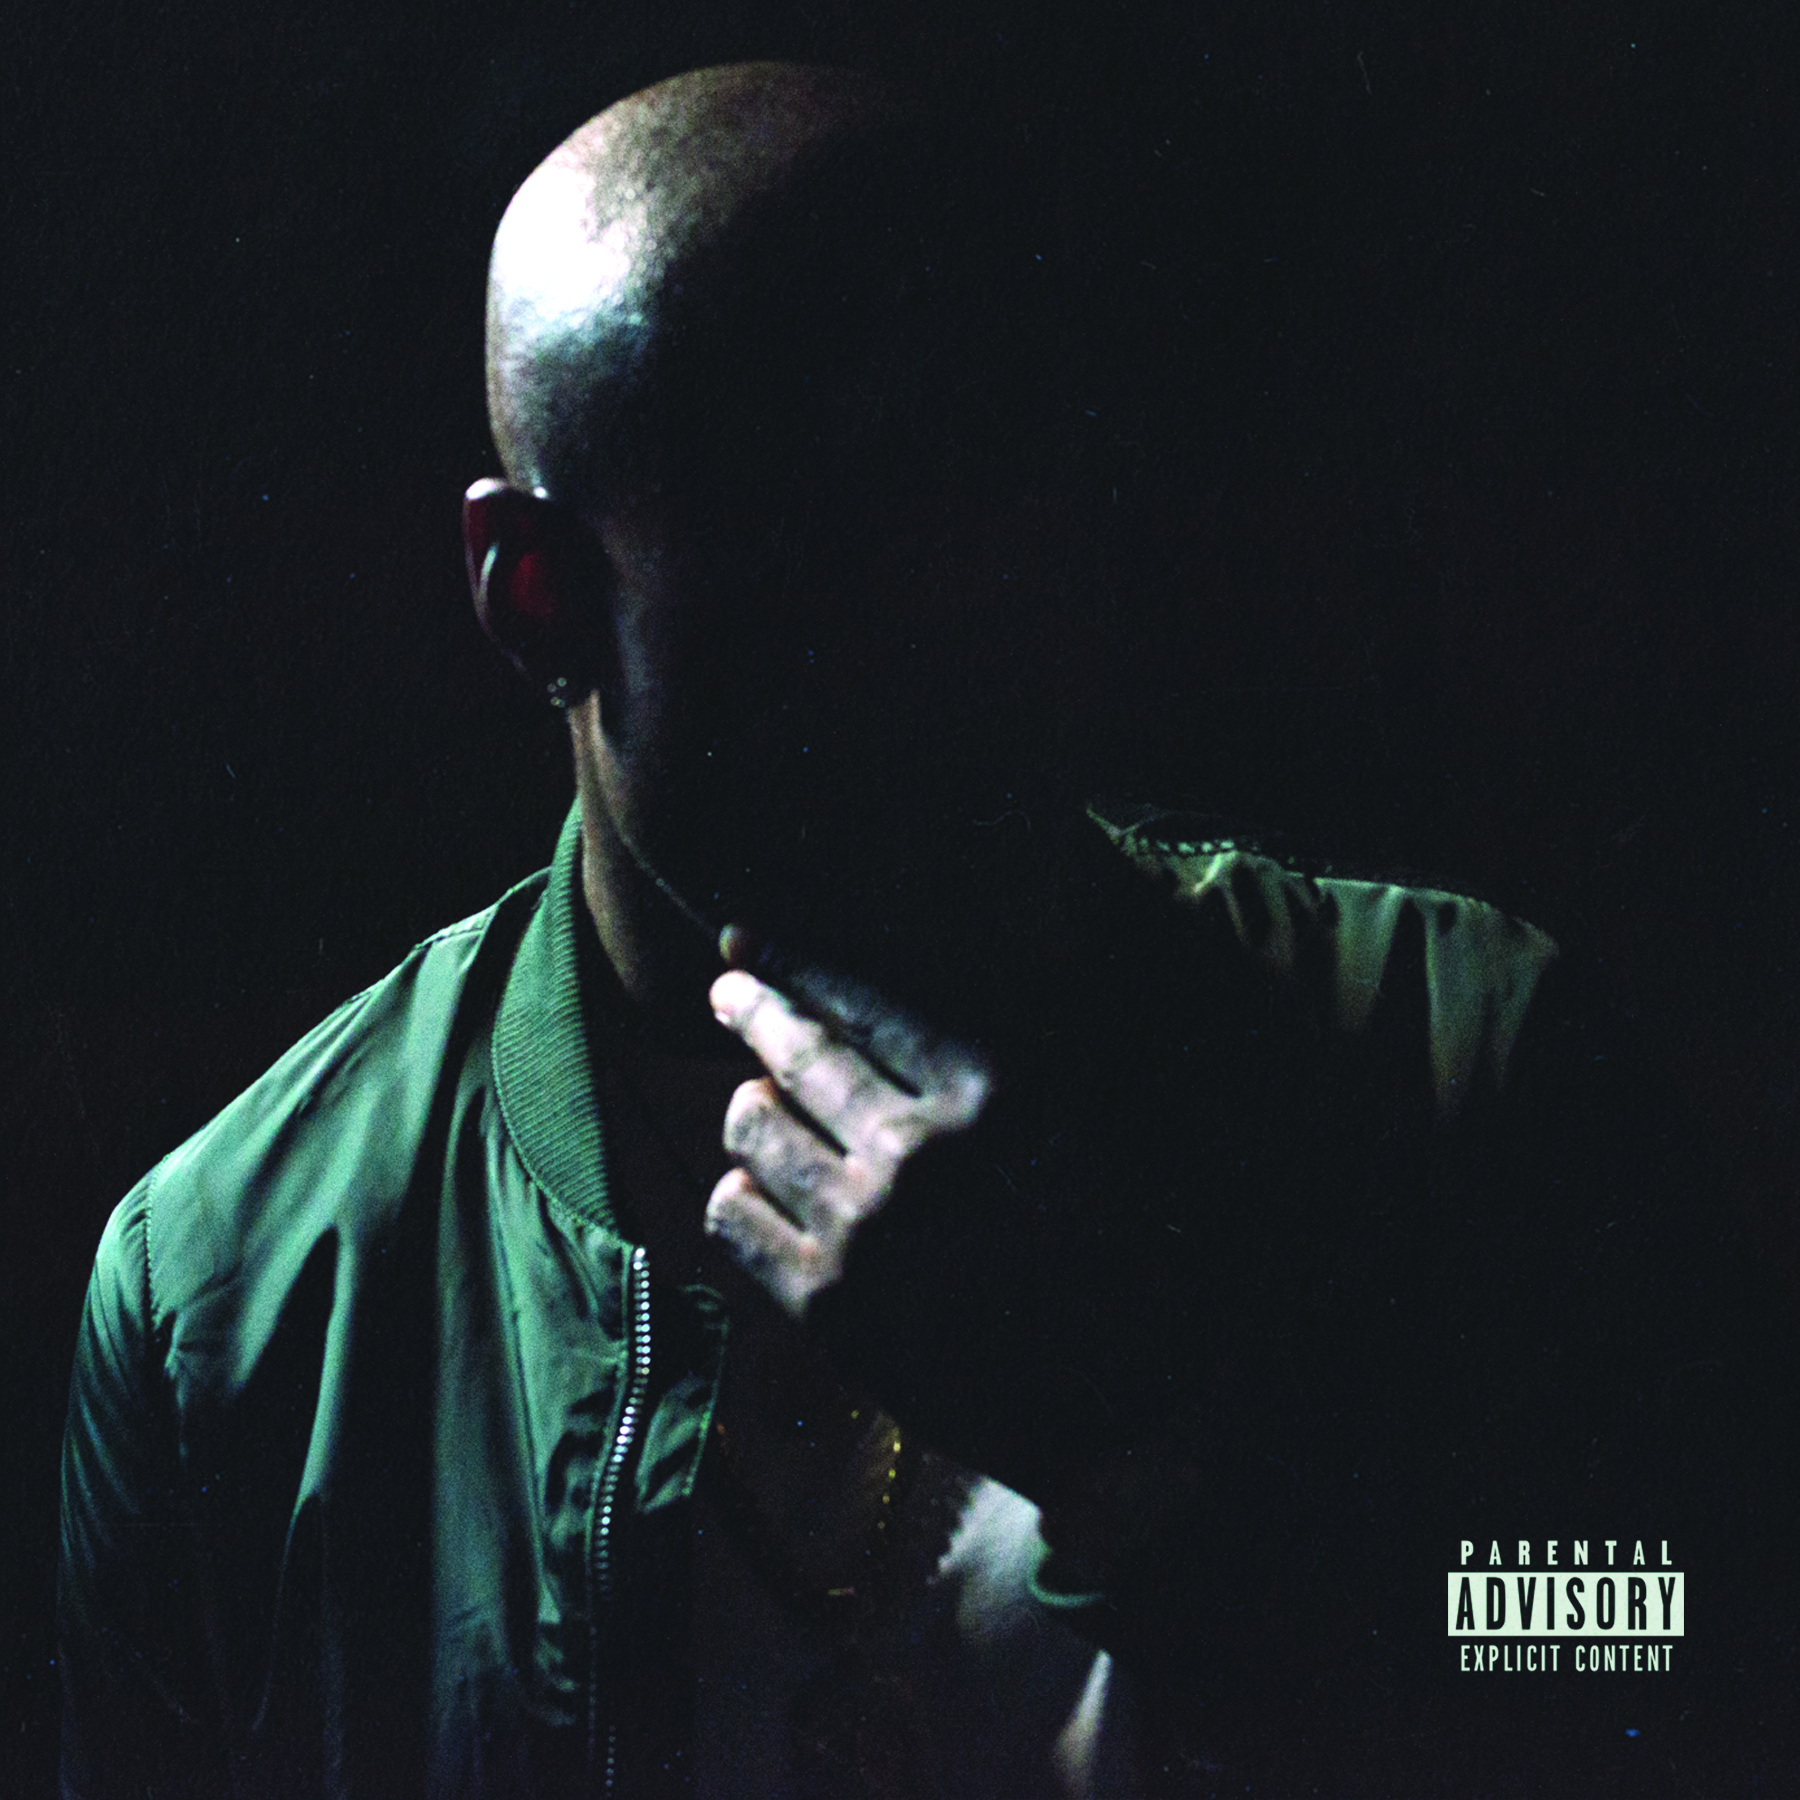 shadow of the doubt freddie gibbs album cover